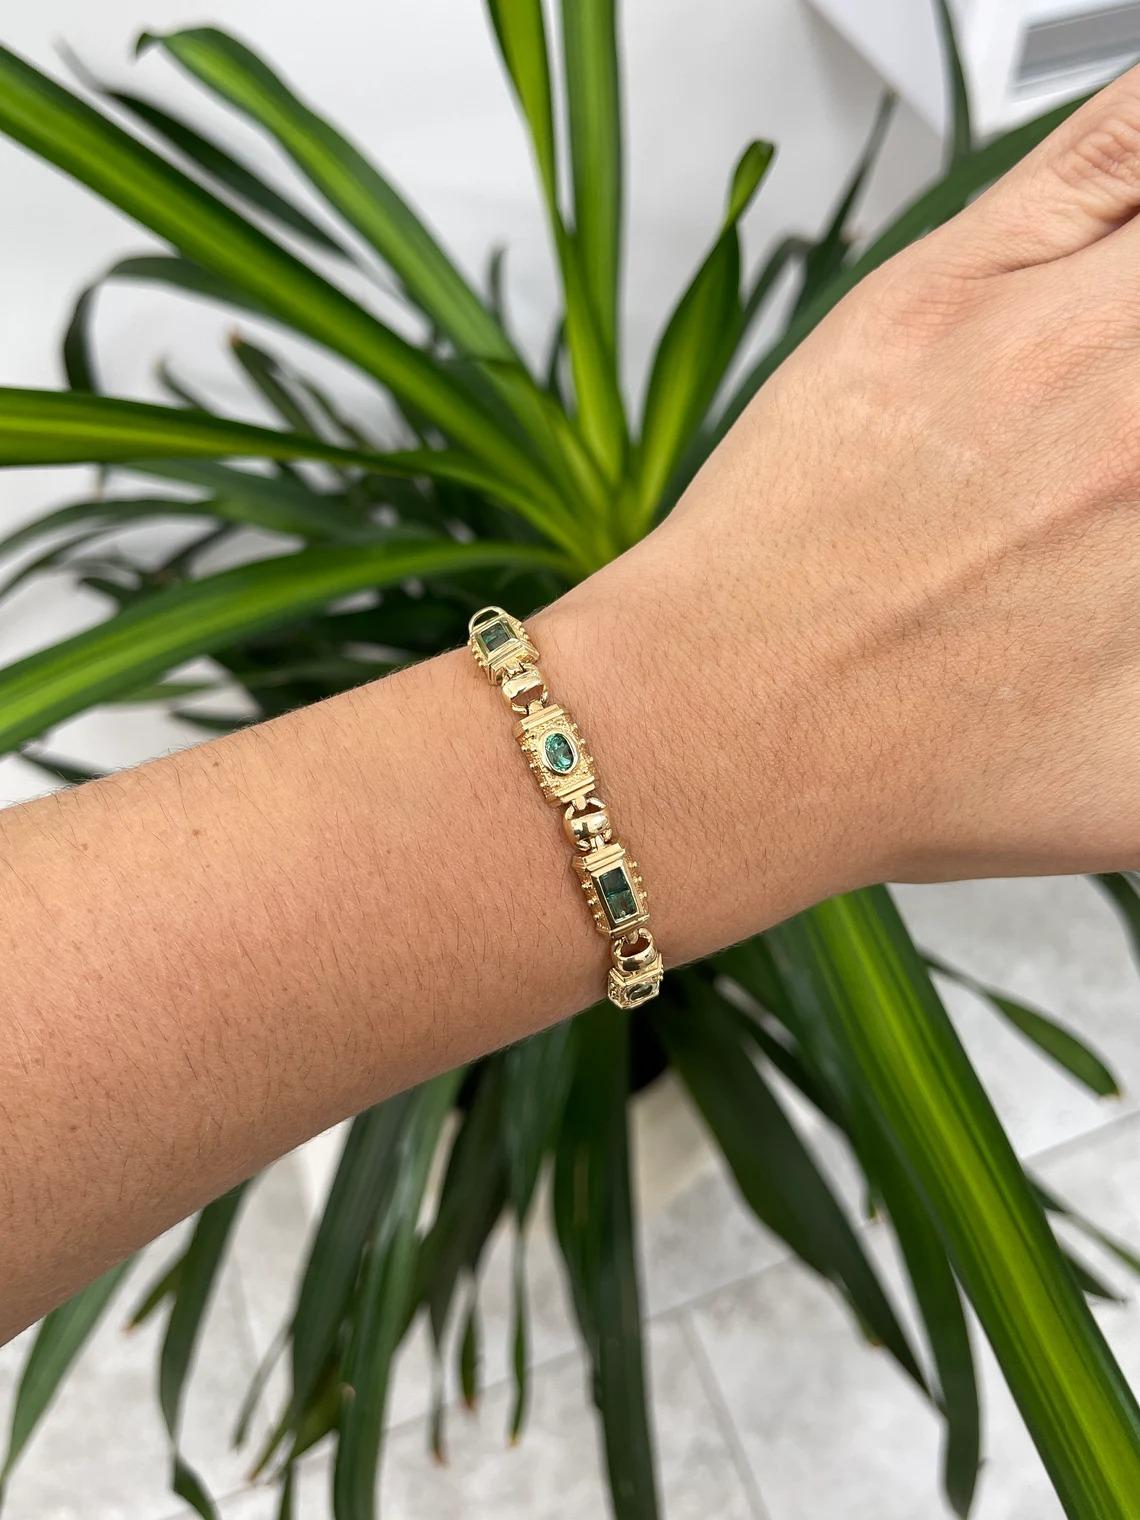 A stunning natural emerald bracelet. This one-of-a-kind piece features a total of 10 gems, four oval cut emeralds and six Asscher cut emeralds put together to create this masterpiece. Carefully crafted and bezel set in gleaming 14K yellow